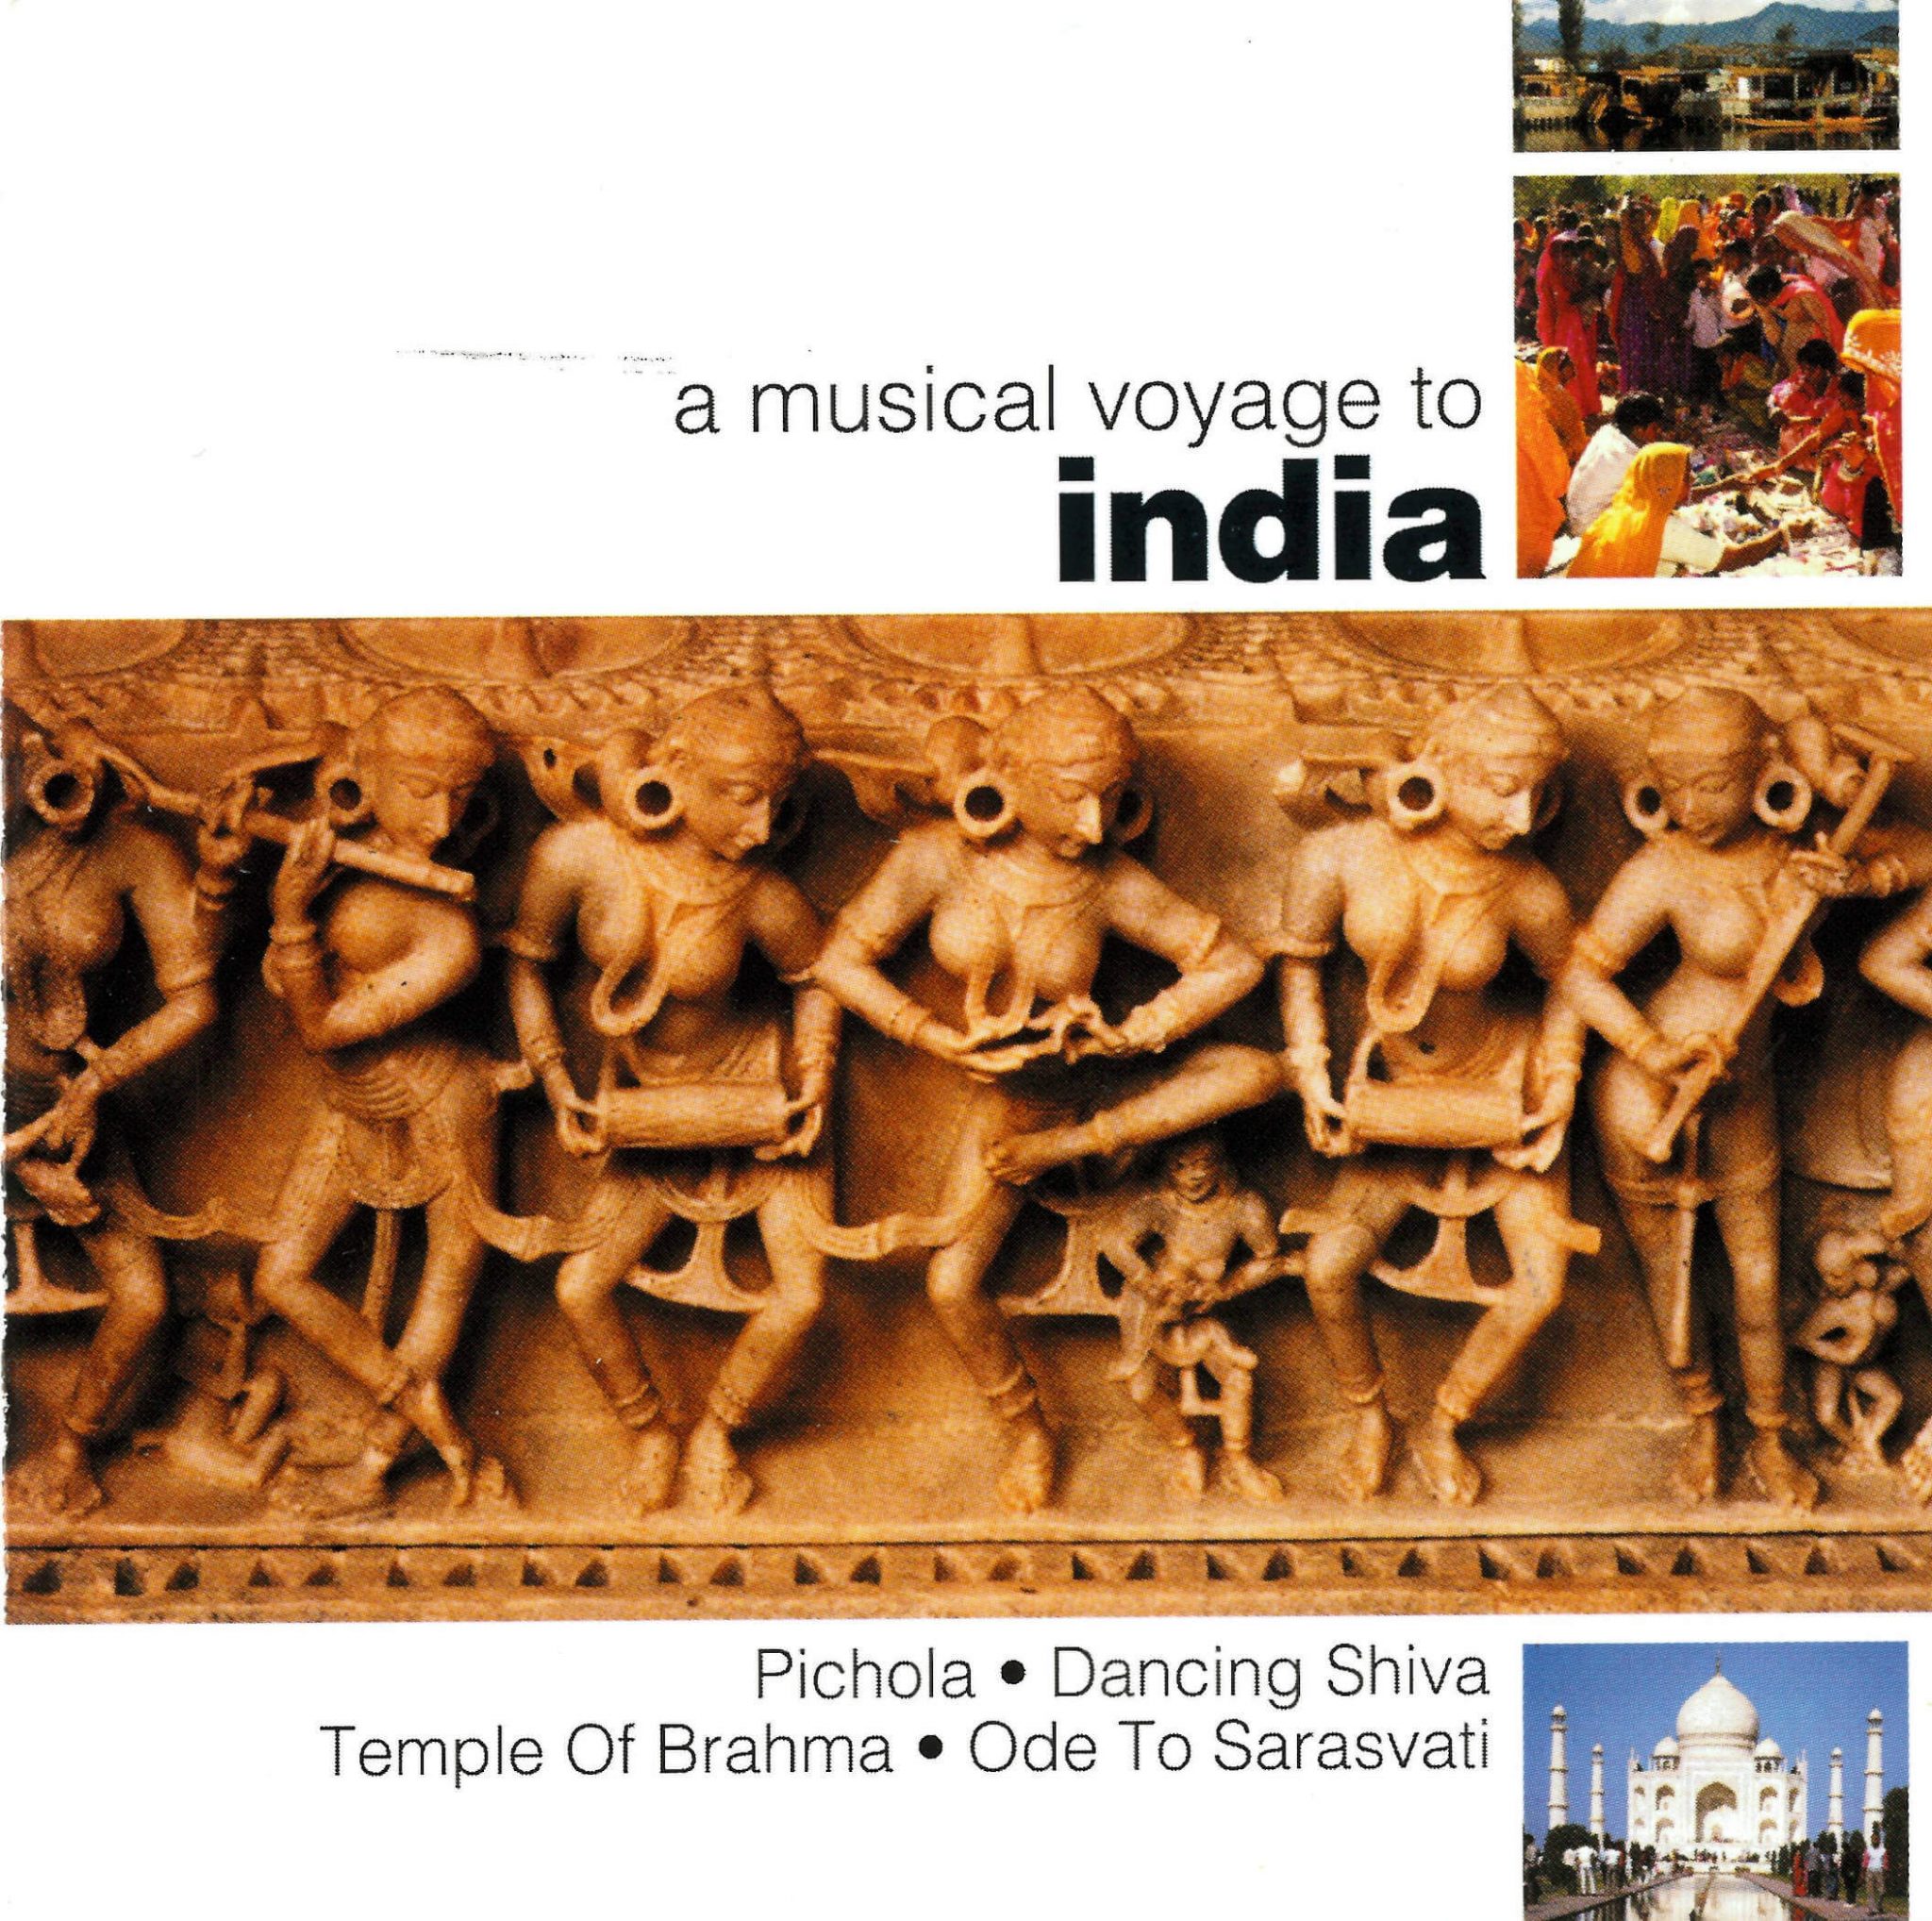 A musical voyage to India